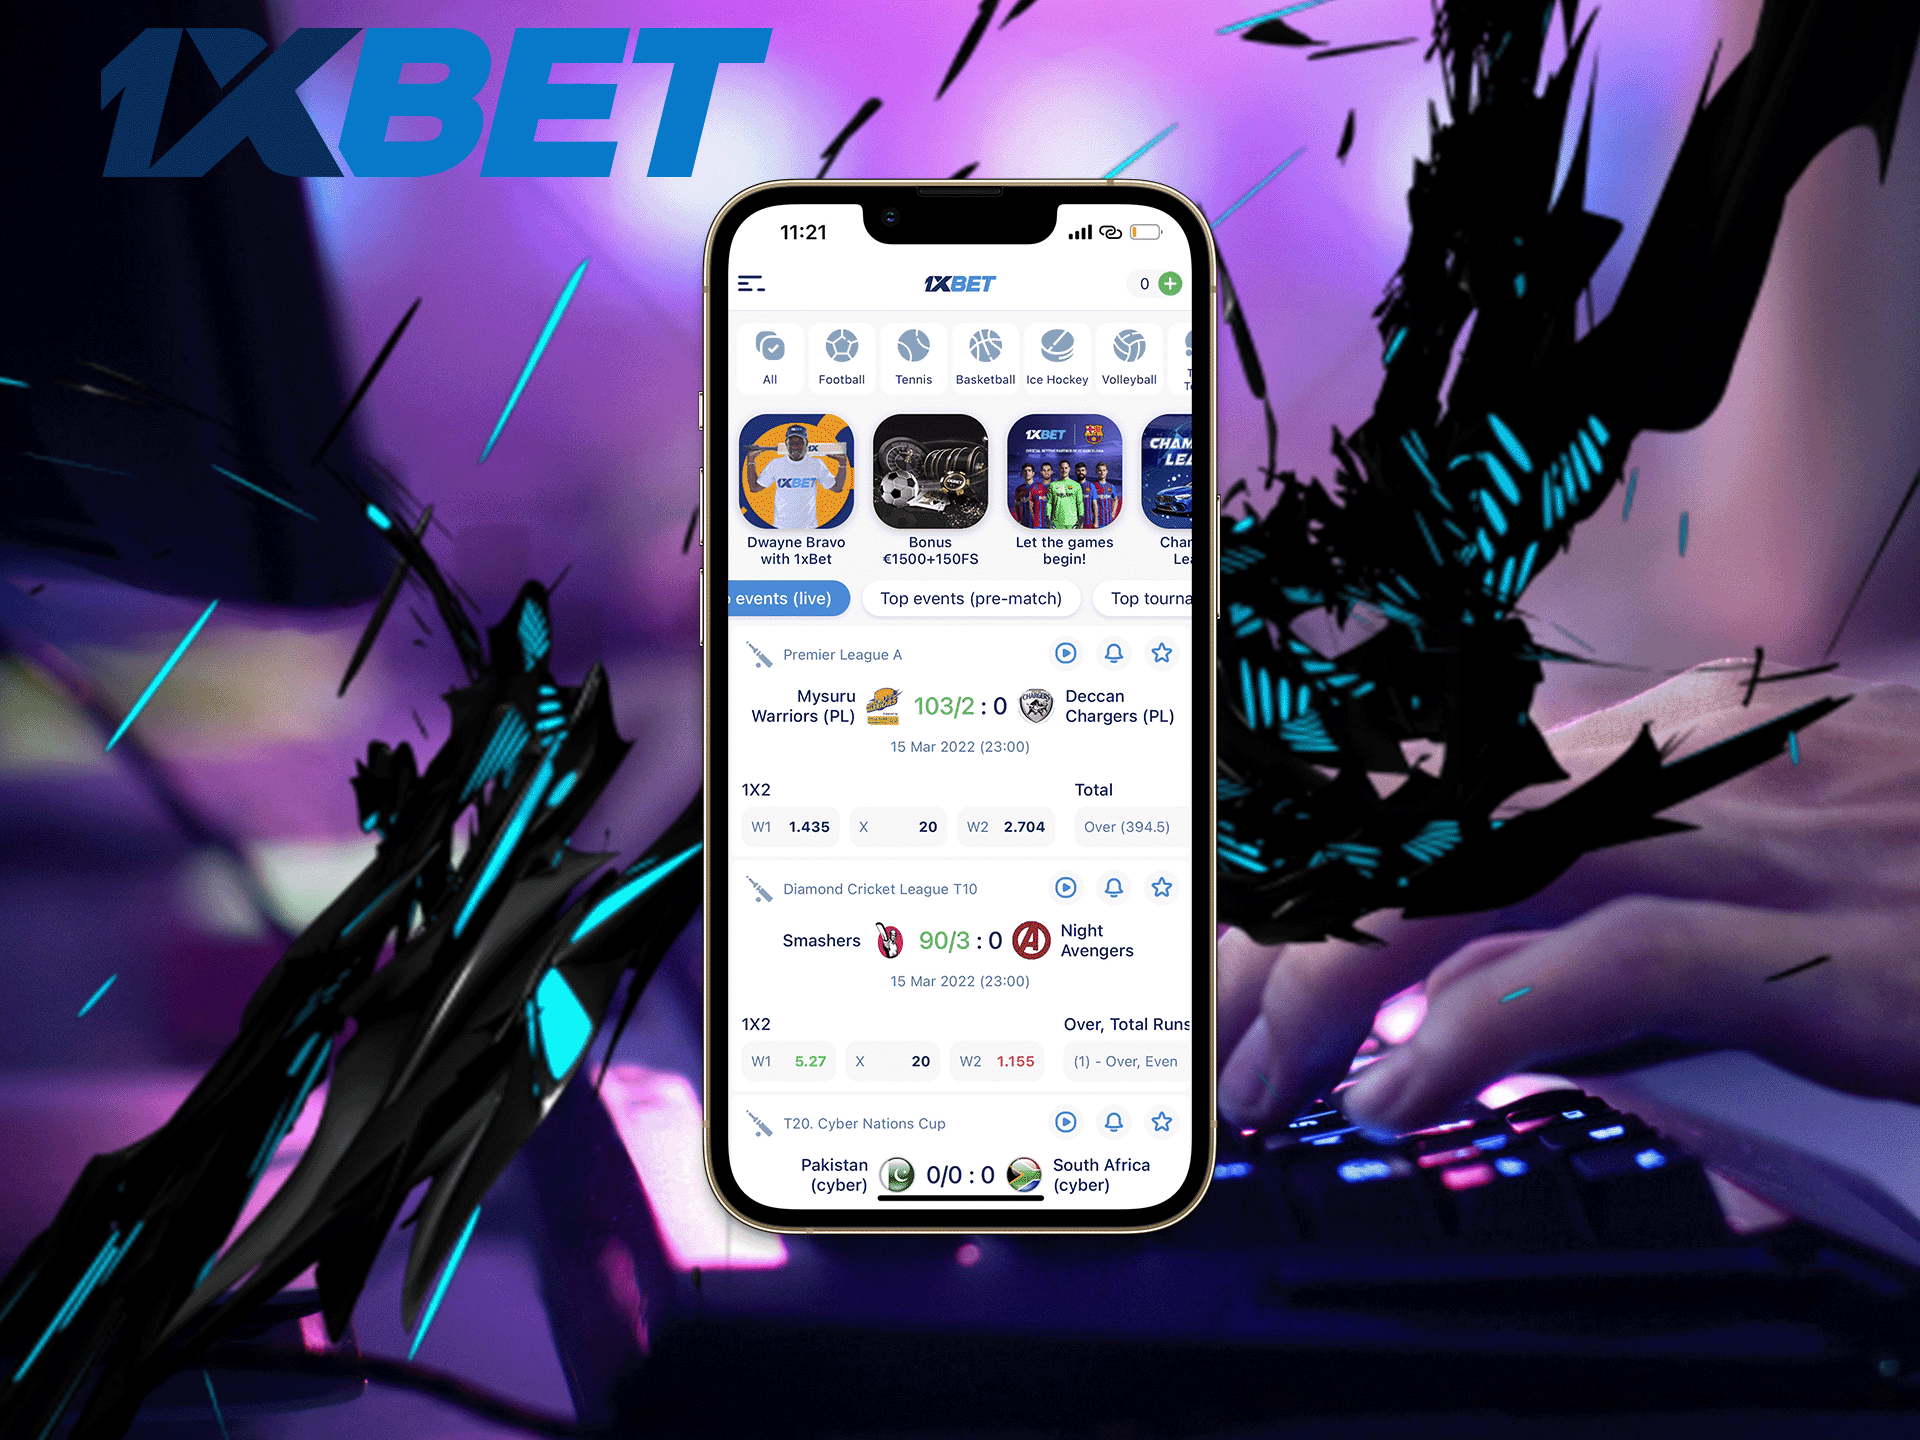 Esports betting is available at 1xbet.